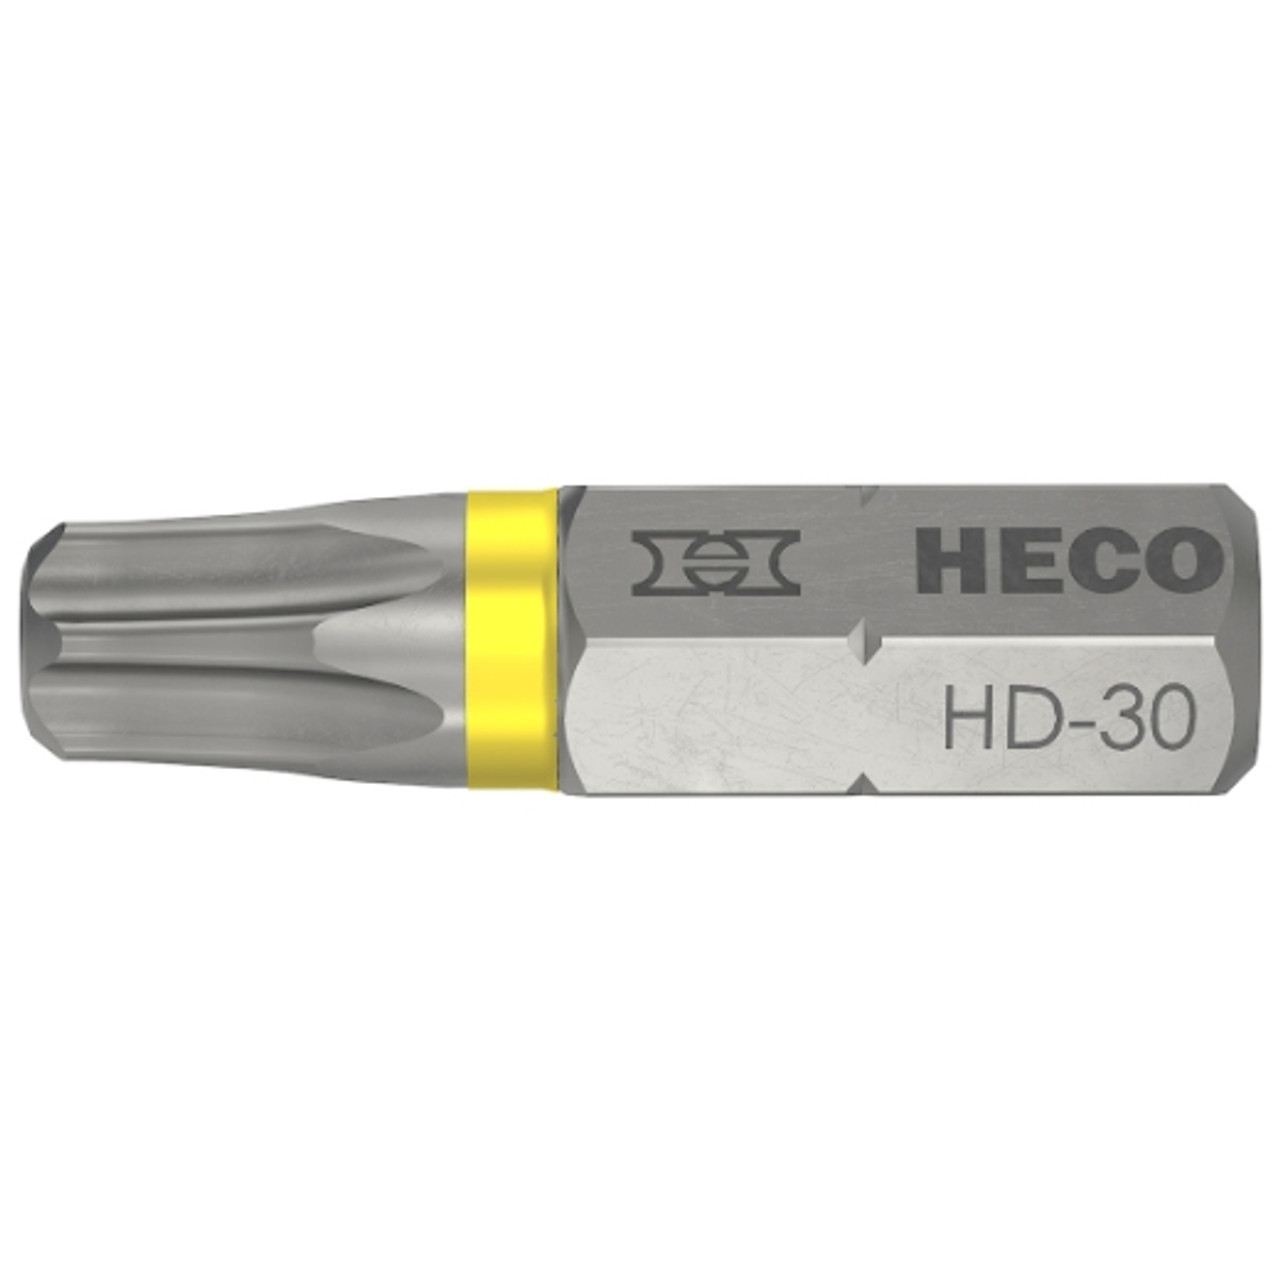 HECO Schrauben Drive Bits | Pack of 2 T30 / HD30 Drive Bits for Torx Drive, Screws and Fasteners, Chipboard Screws, Pan Head Screws, Trade Supplies and Woodworking